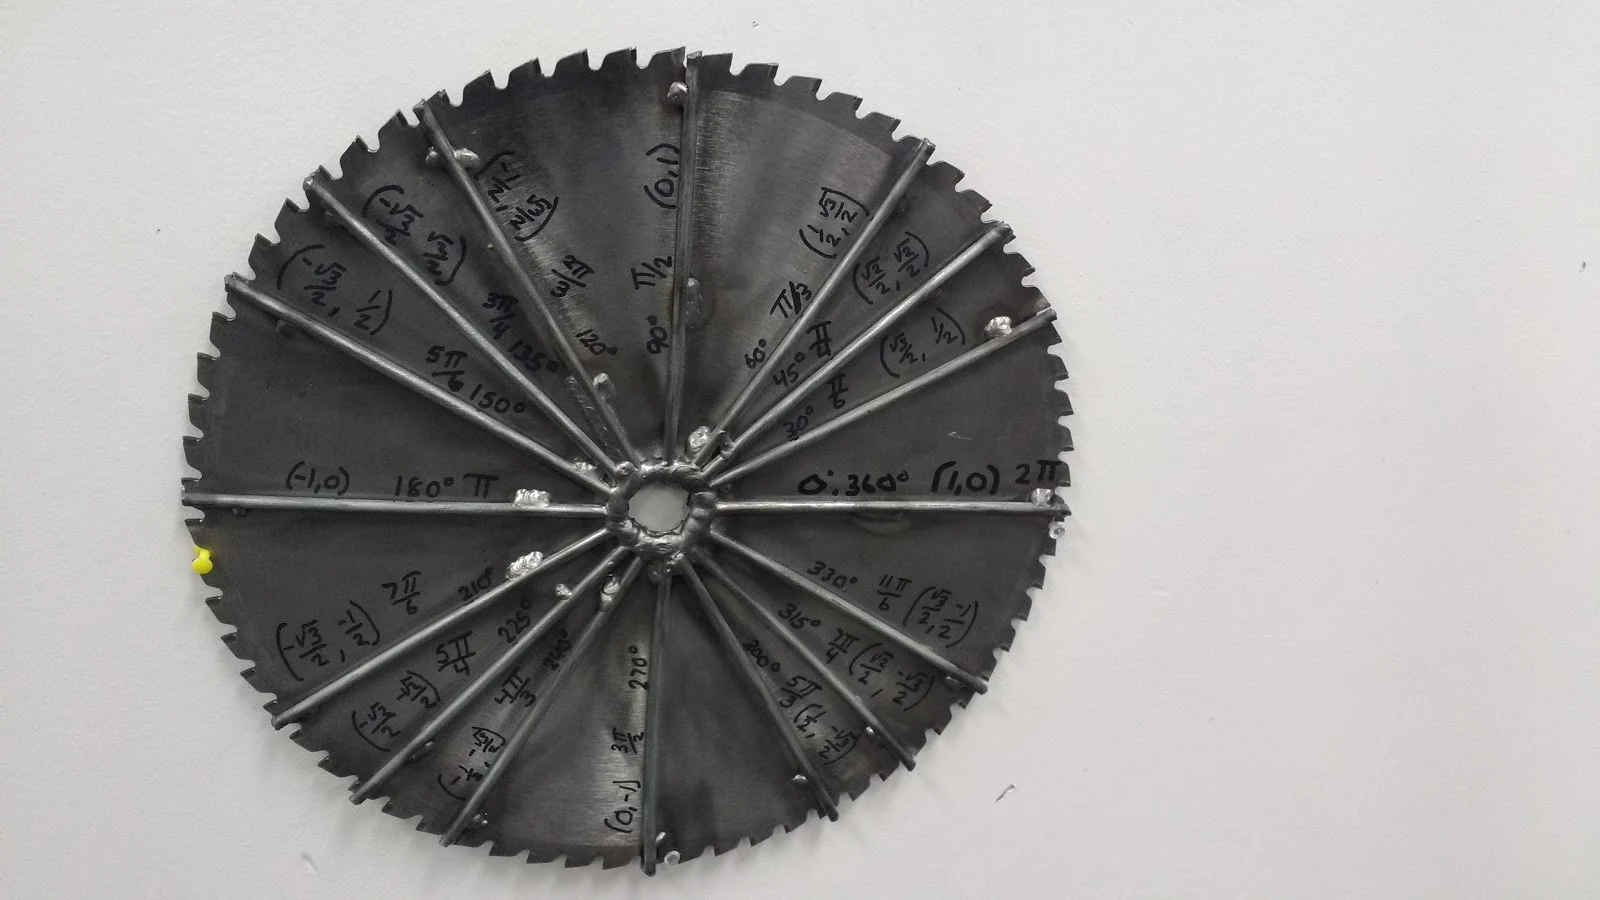 Unit Circle Saw Blade Project